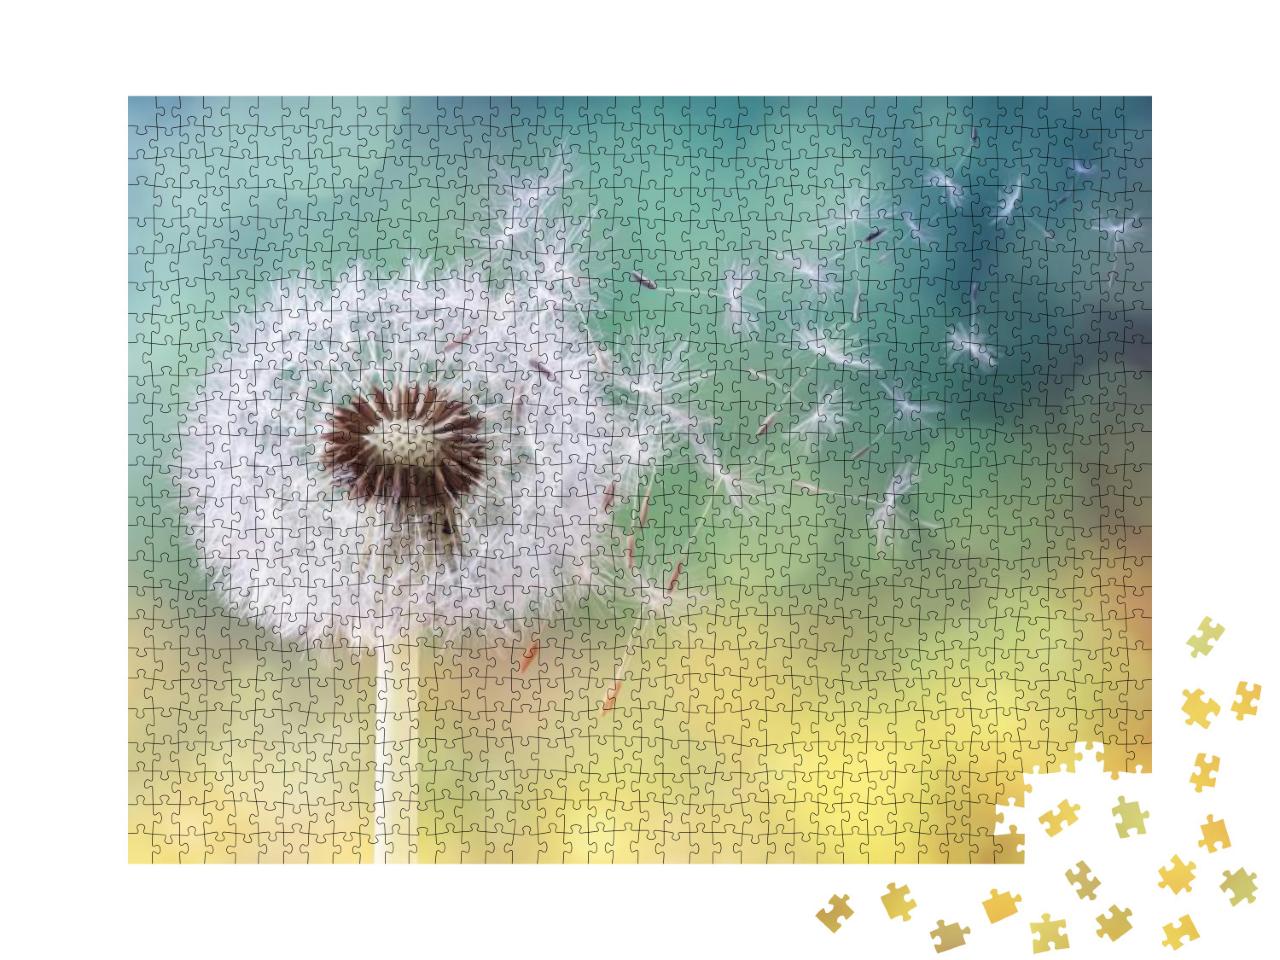 Dandelion Seeds in the Sunlight Blowing Away Across a Fre... Jigsaw Puzzle with 1000 pieces